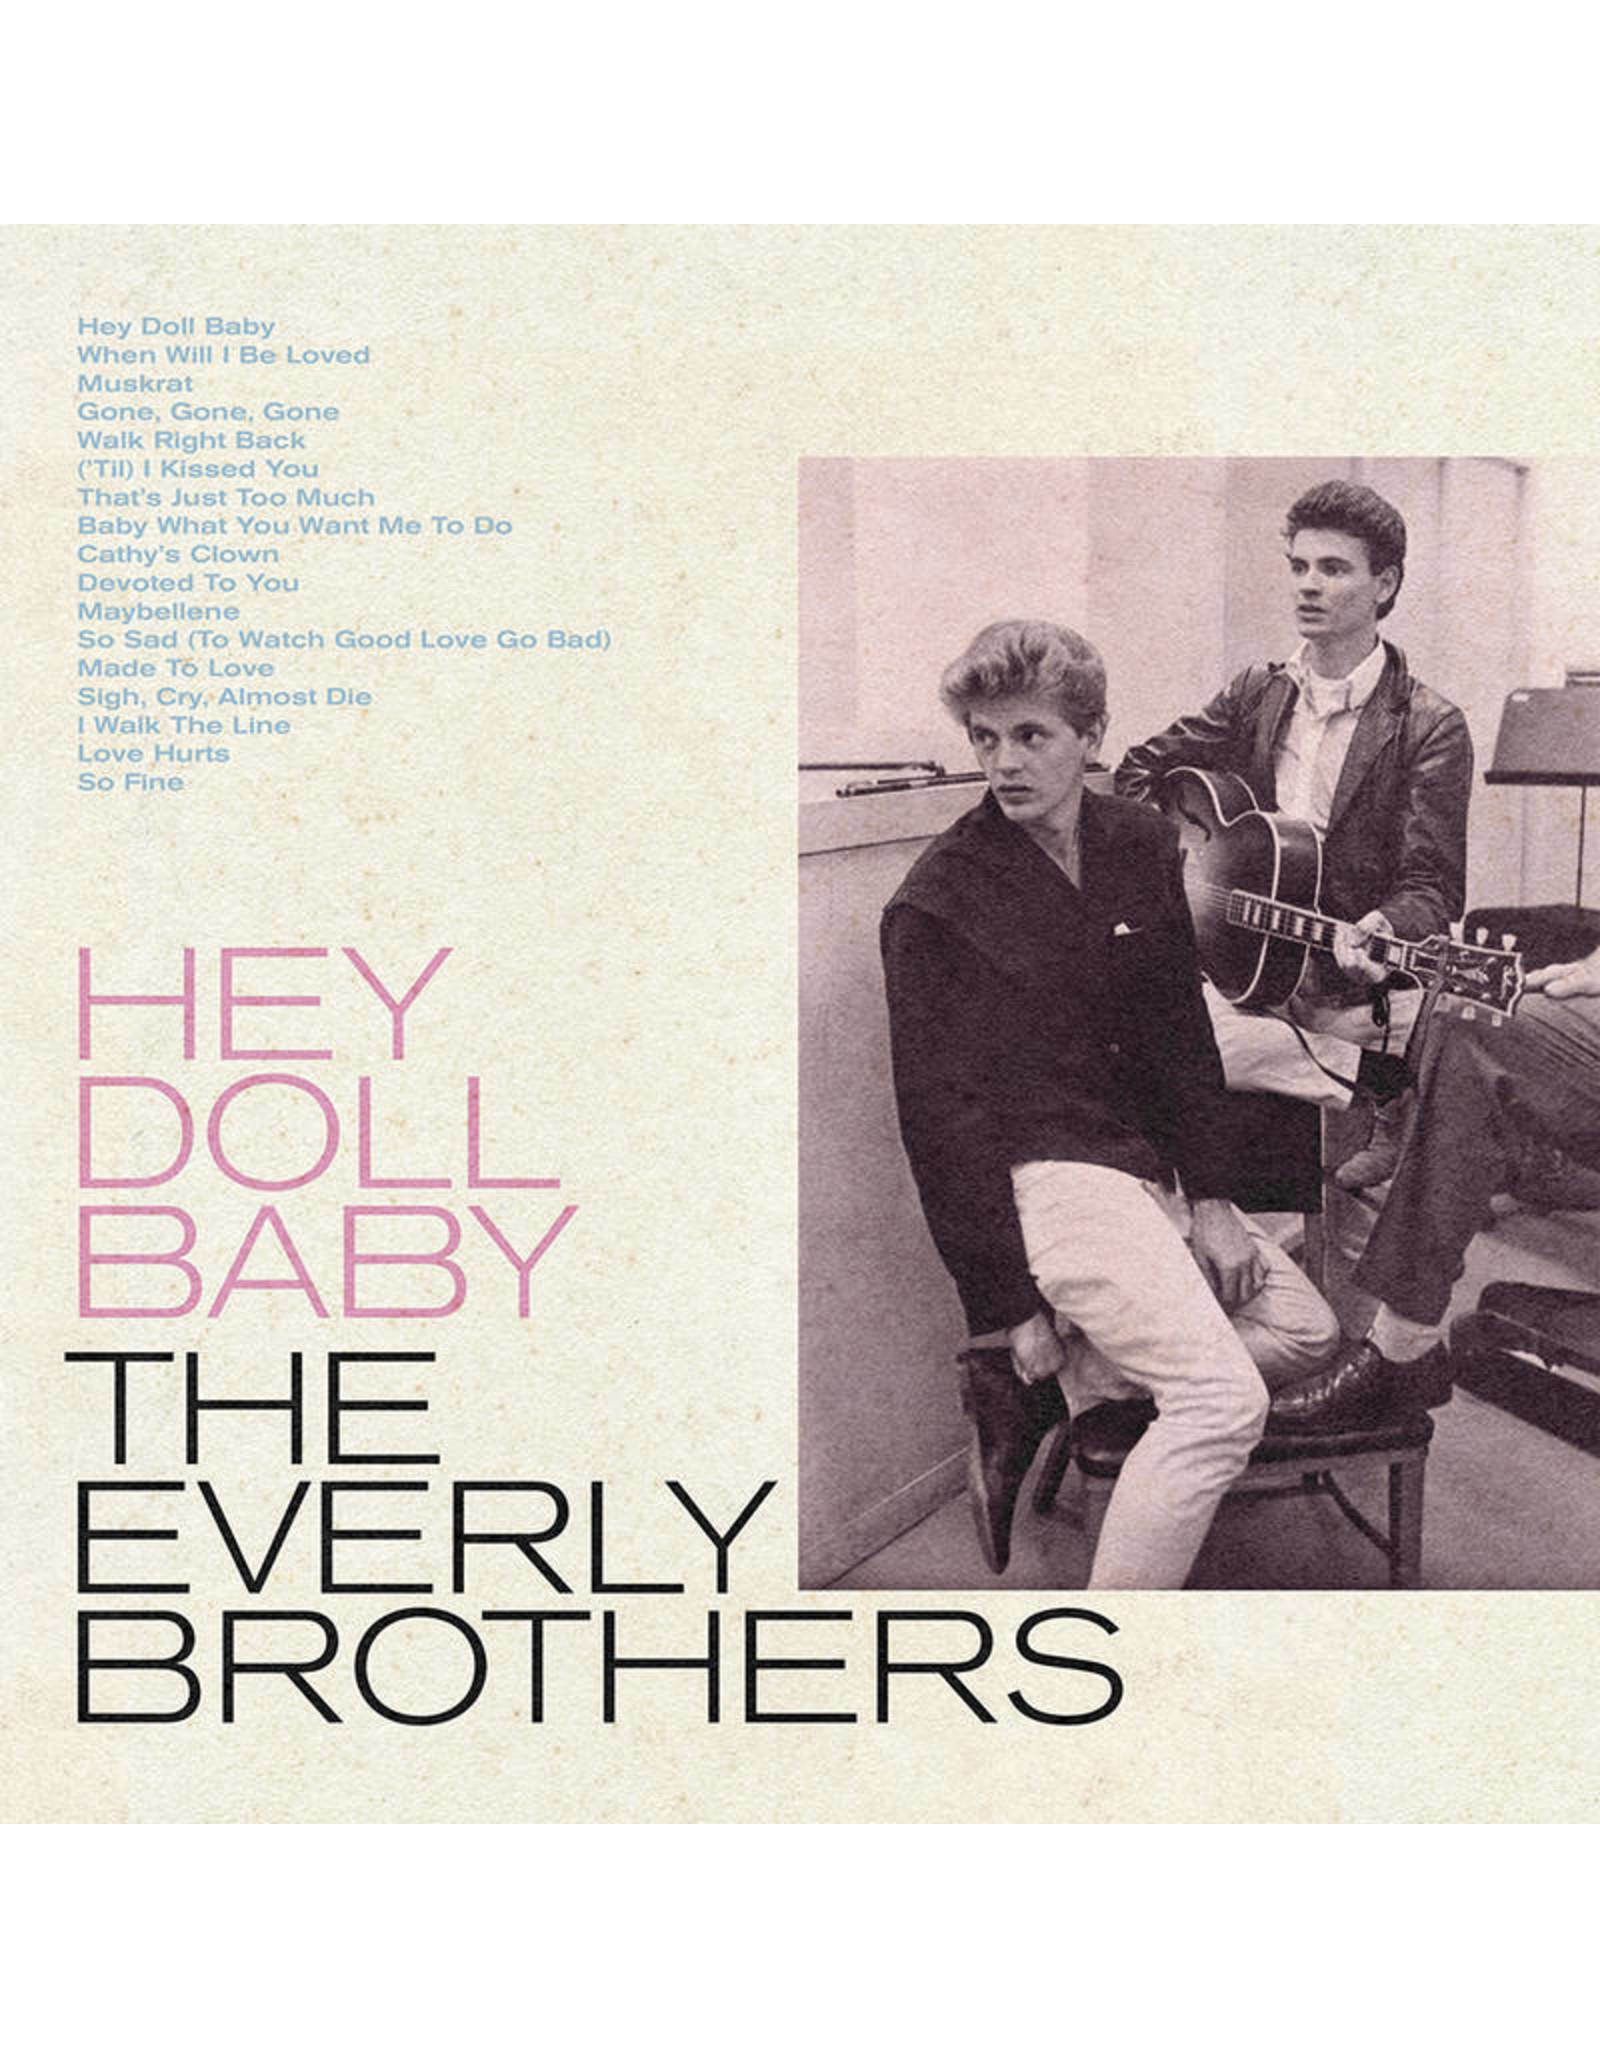 Everly Brothers - Hey Doll Baby [Baby Blue Vinyl]